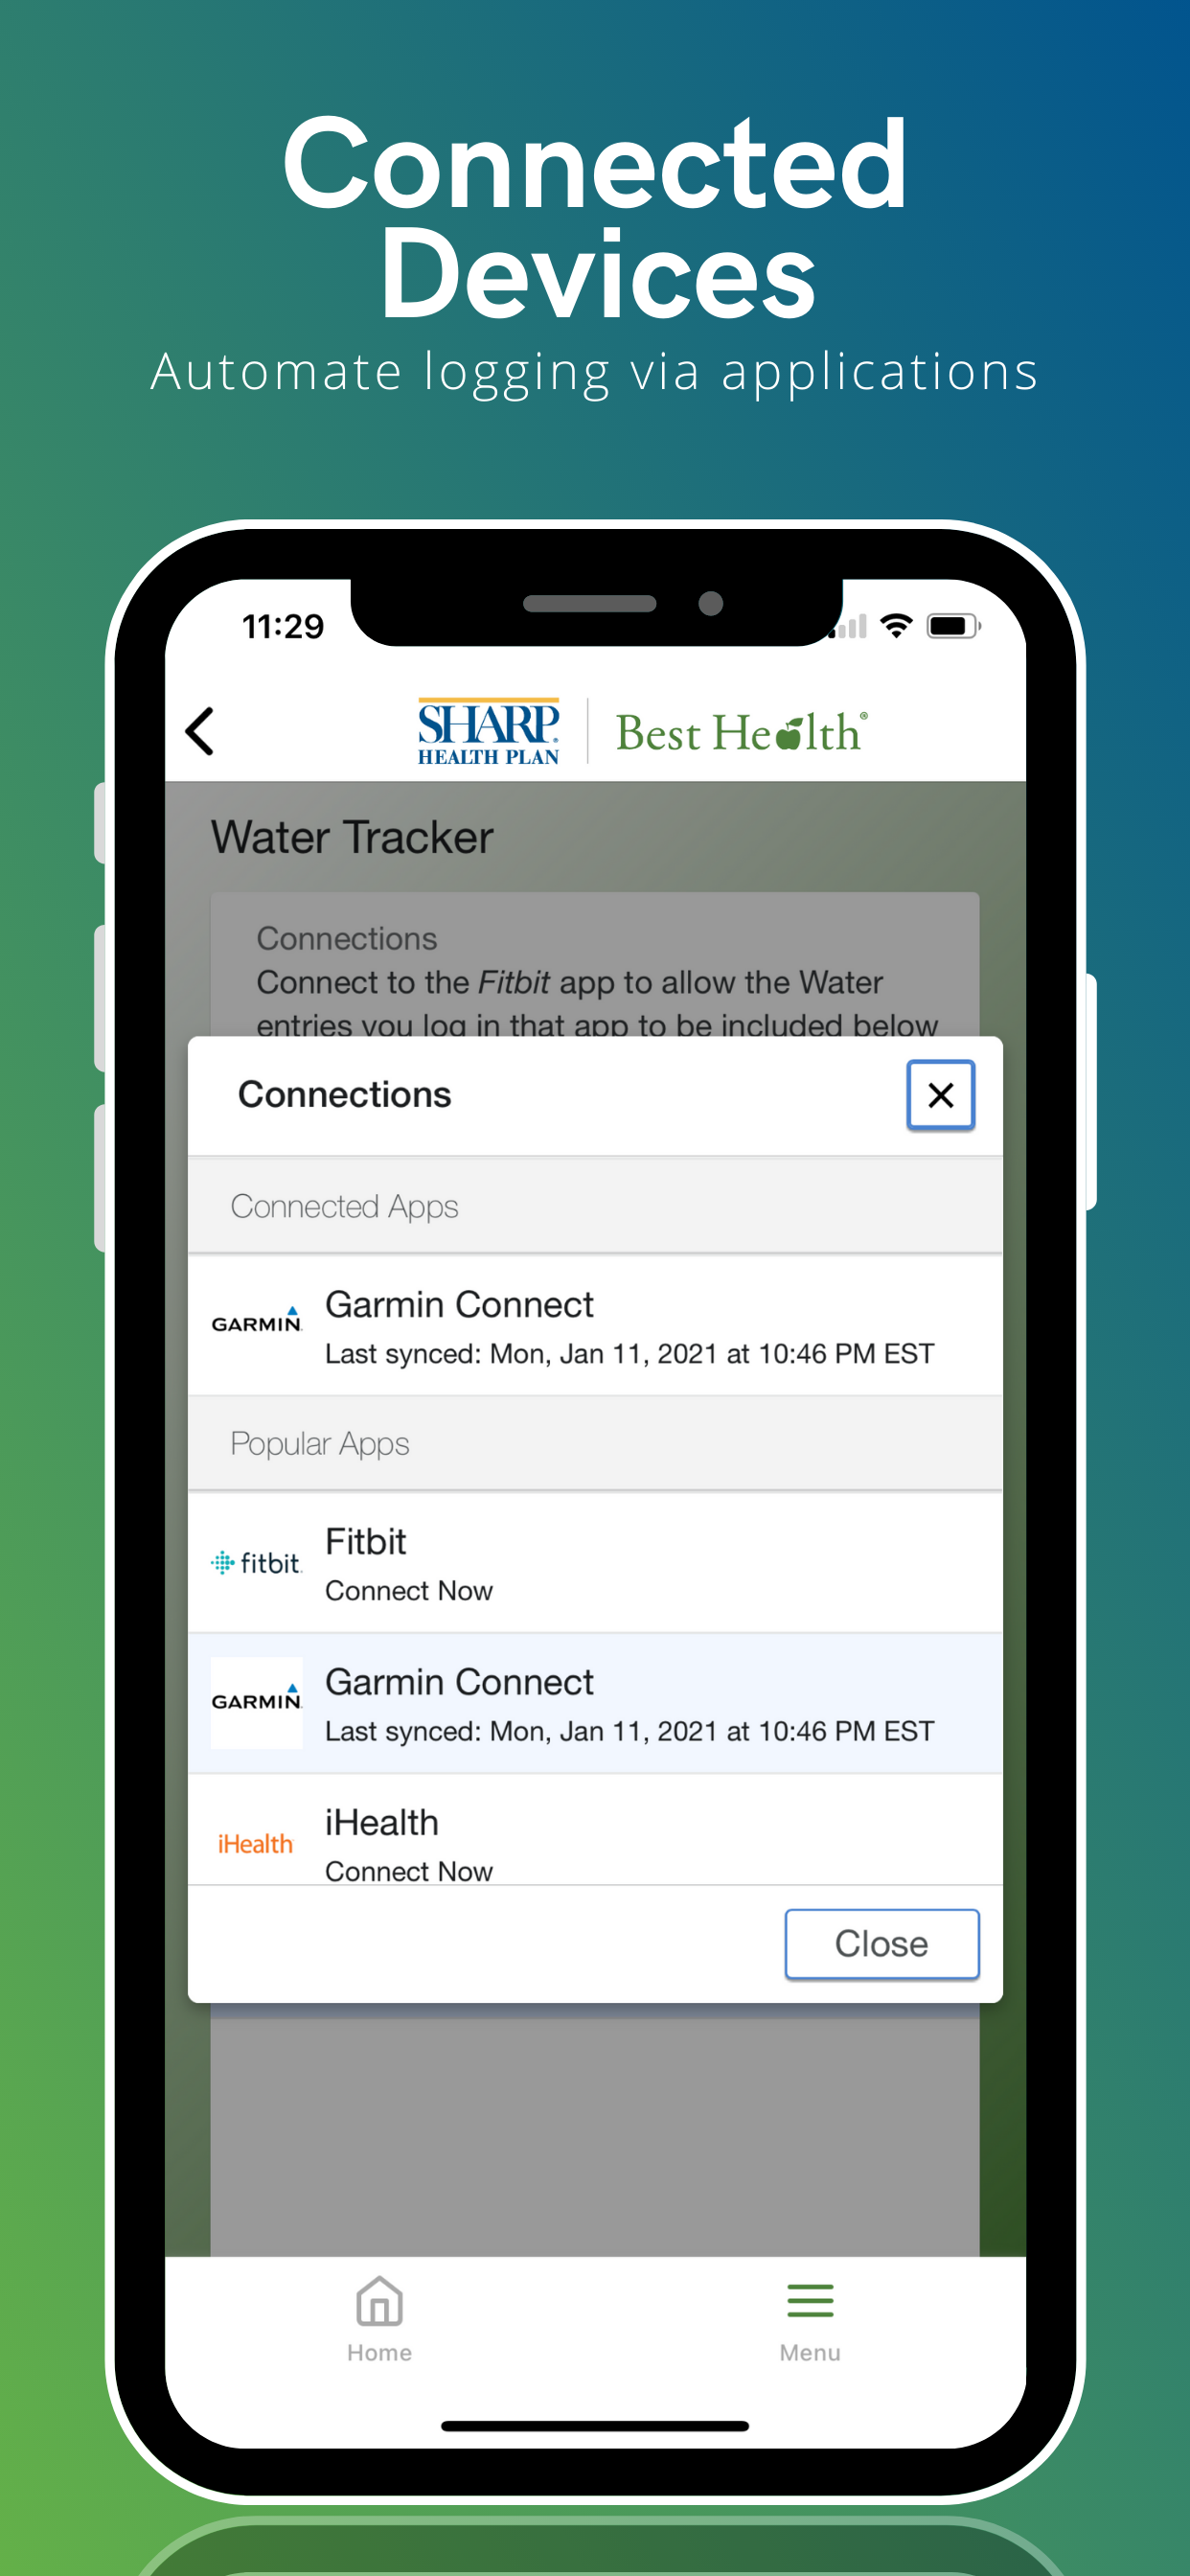 2022_Best Health App_Connected Devices